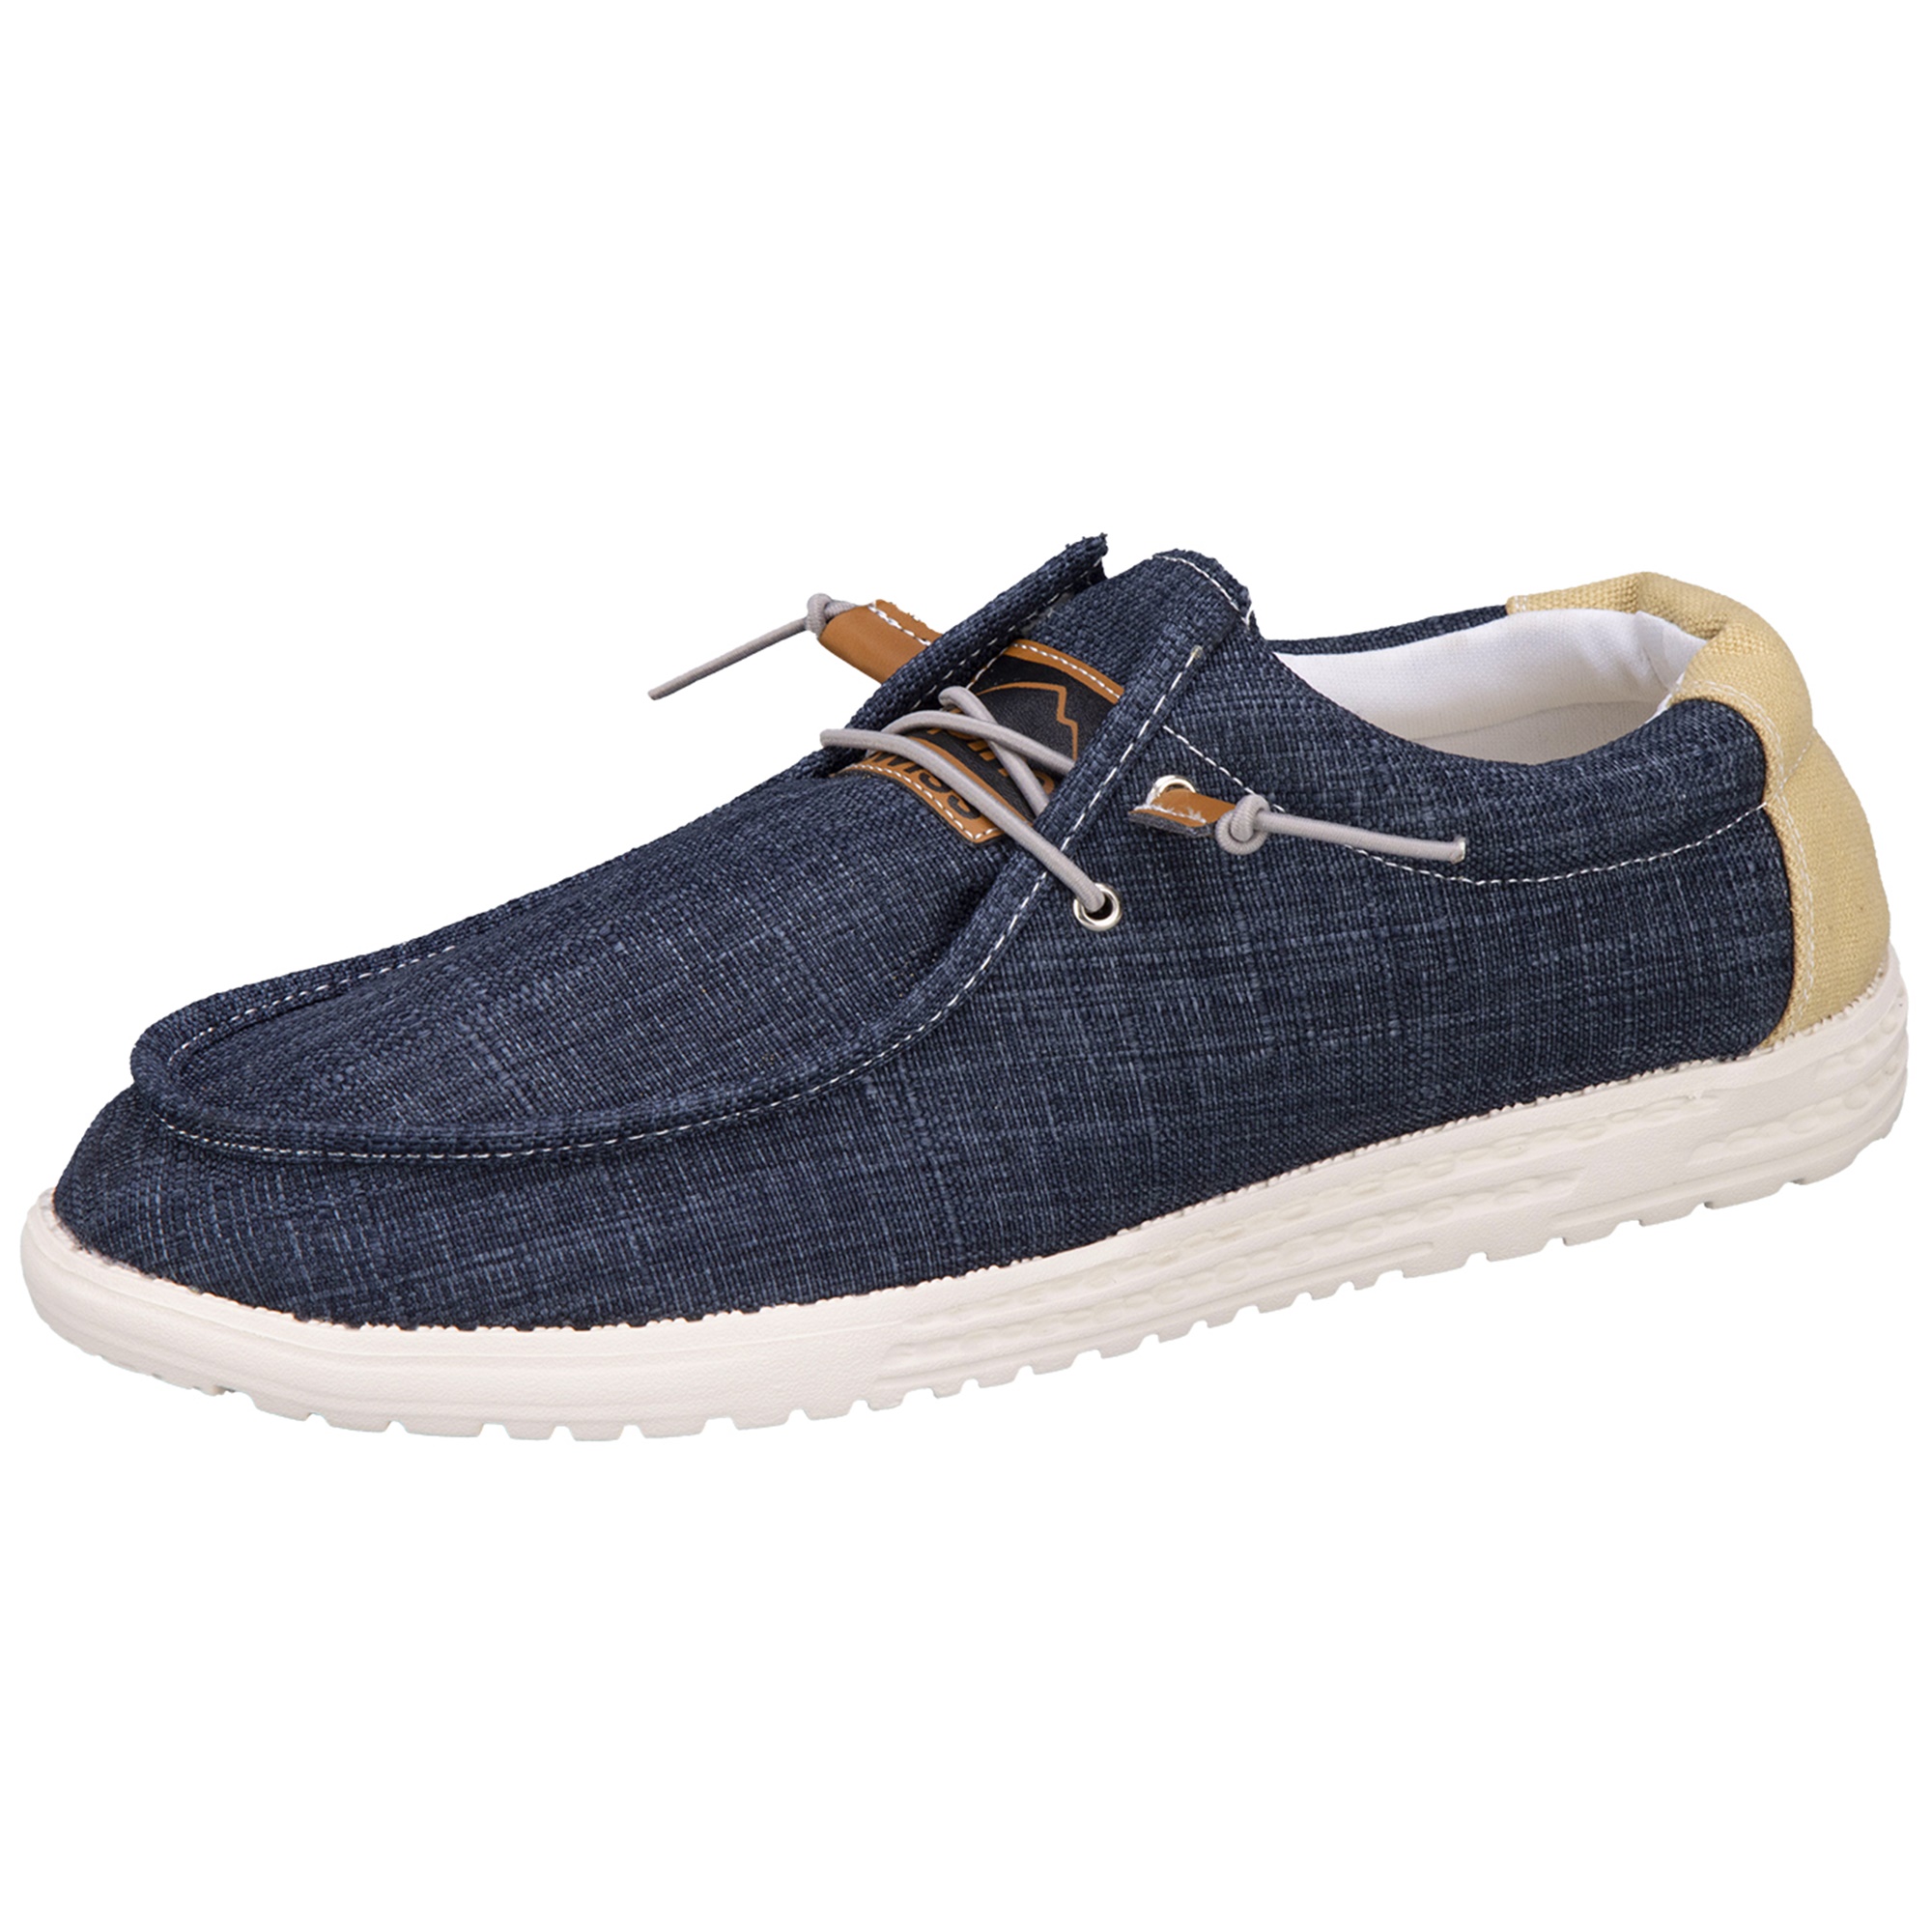 Alpine Swiss Flynn Mens Boat Shoes Casual Slip On Moccasin Loafers Sailing Deck Shoe So Light It Floats On Water - image 1 of 7